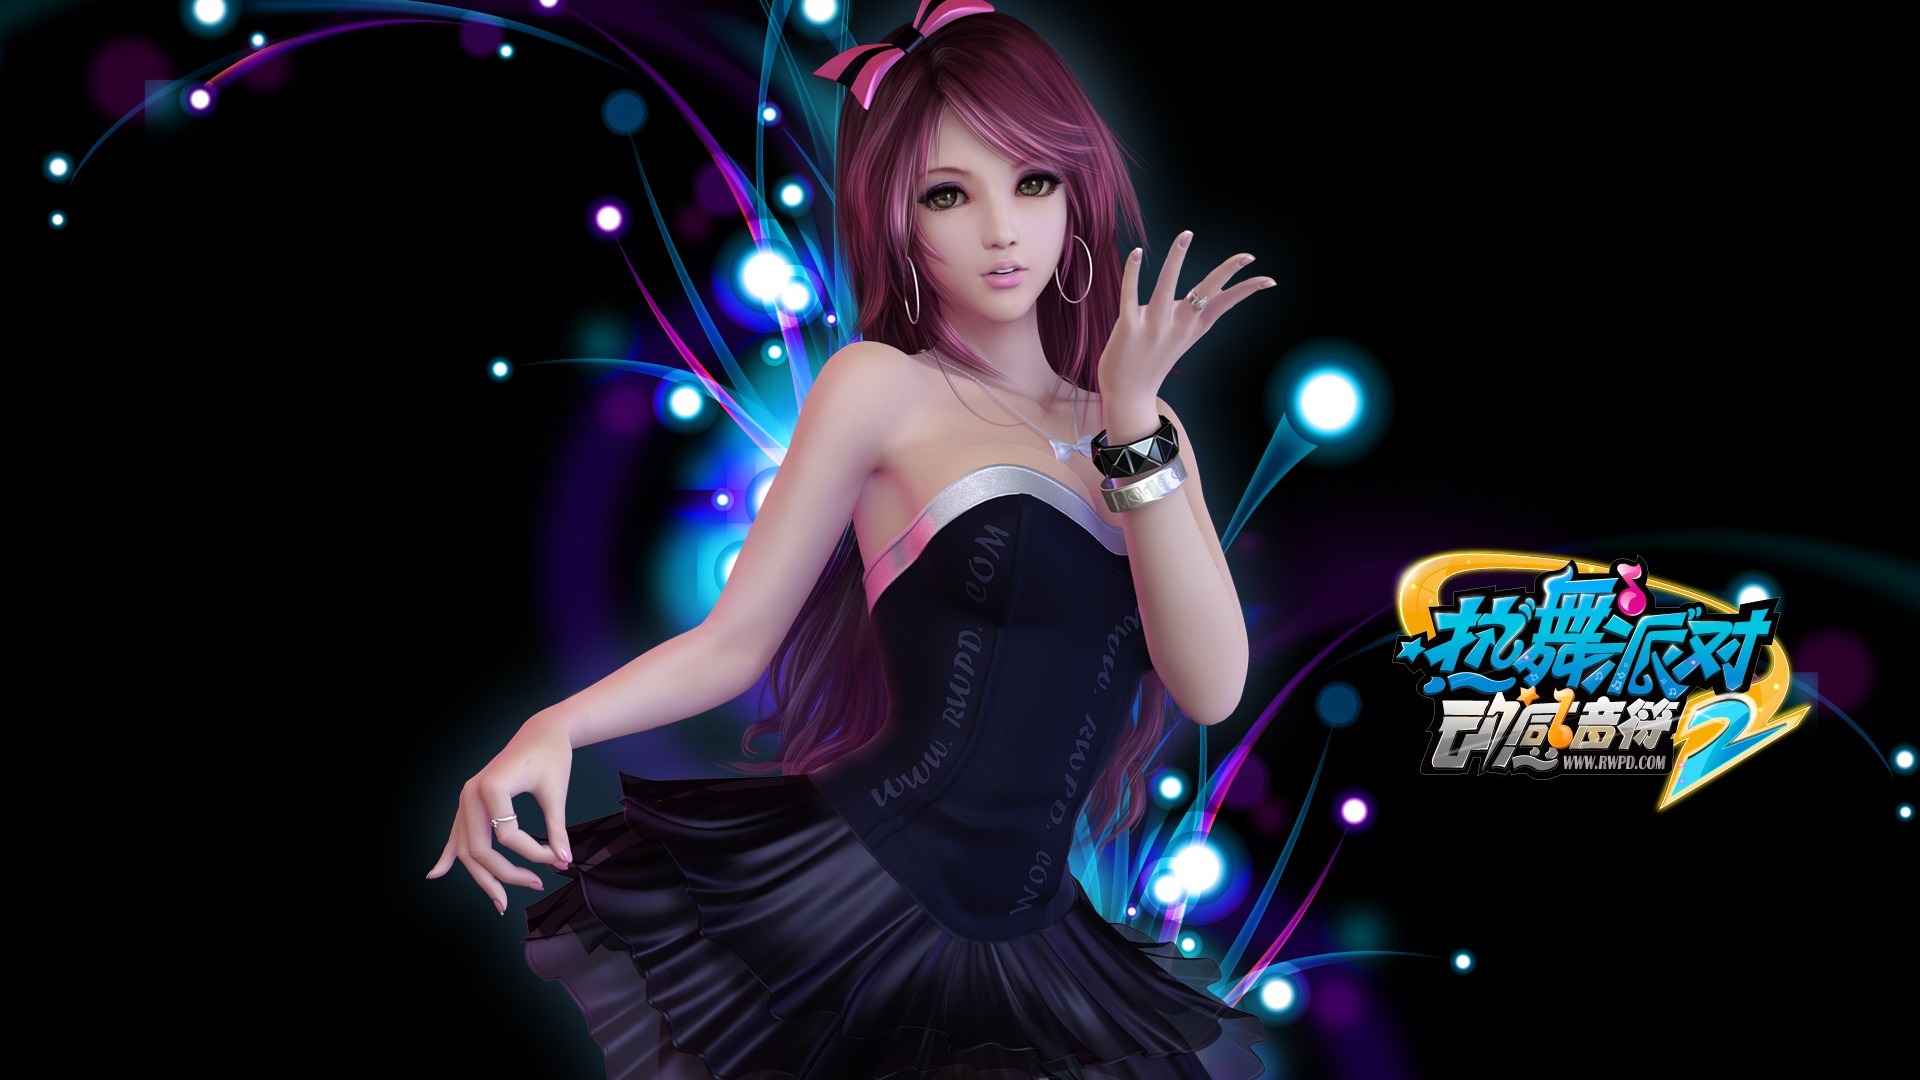 Online game Hot Dance Party II official wallpapers #31 - 1920x1080